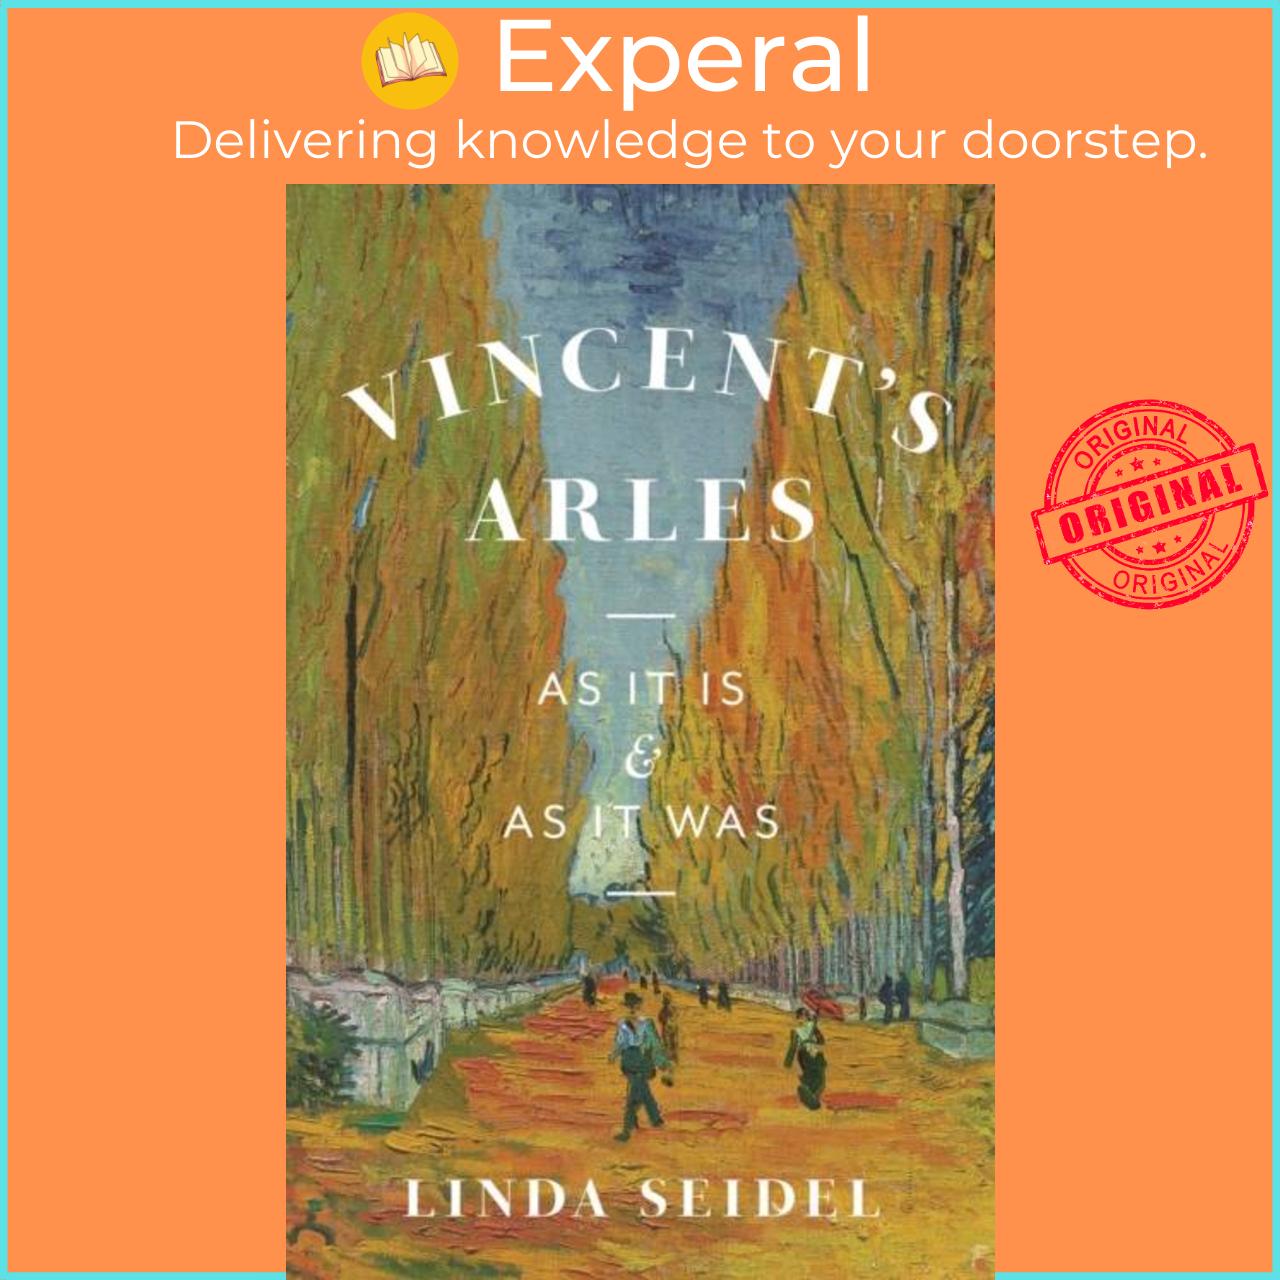 Sách - Vincent's Arles - As It Is and as It Was by Linda Seidel (UK edition, hardcover)